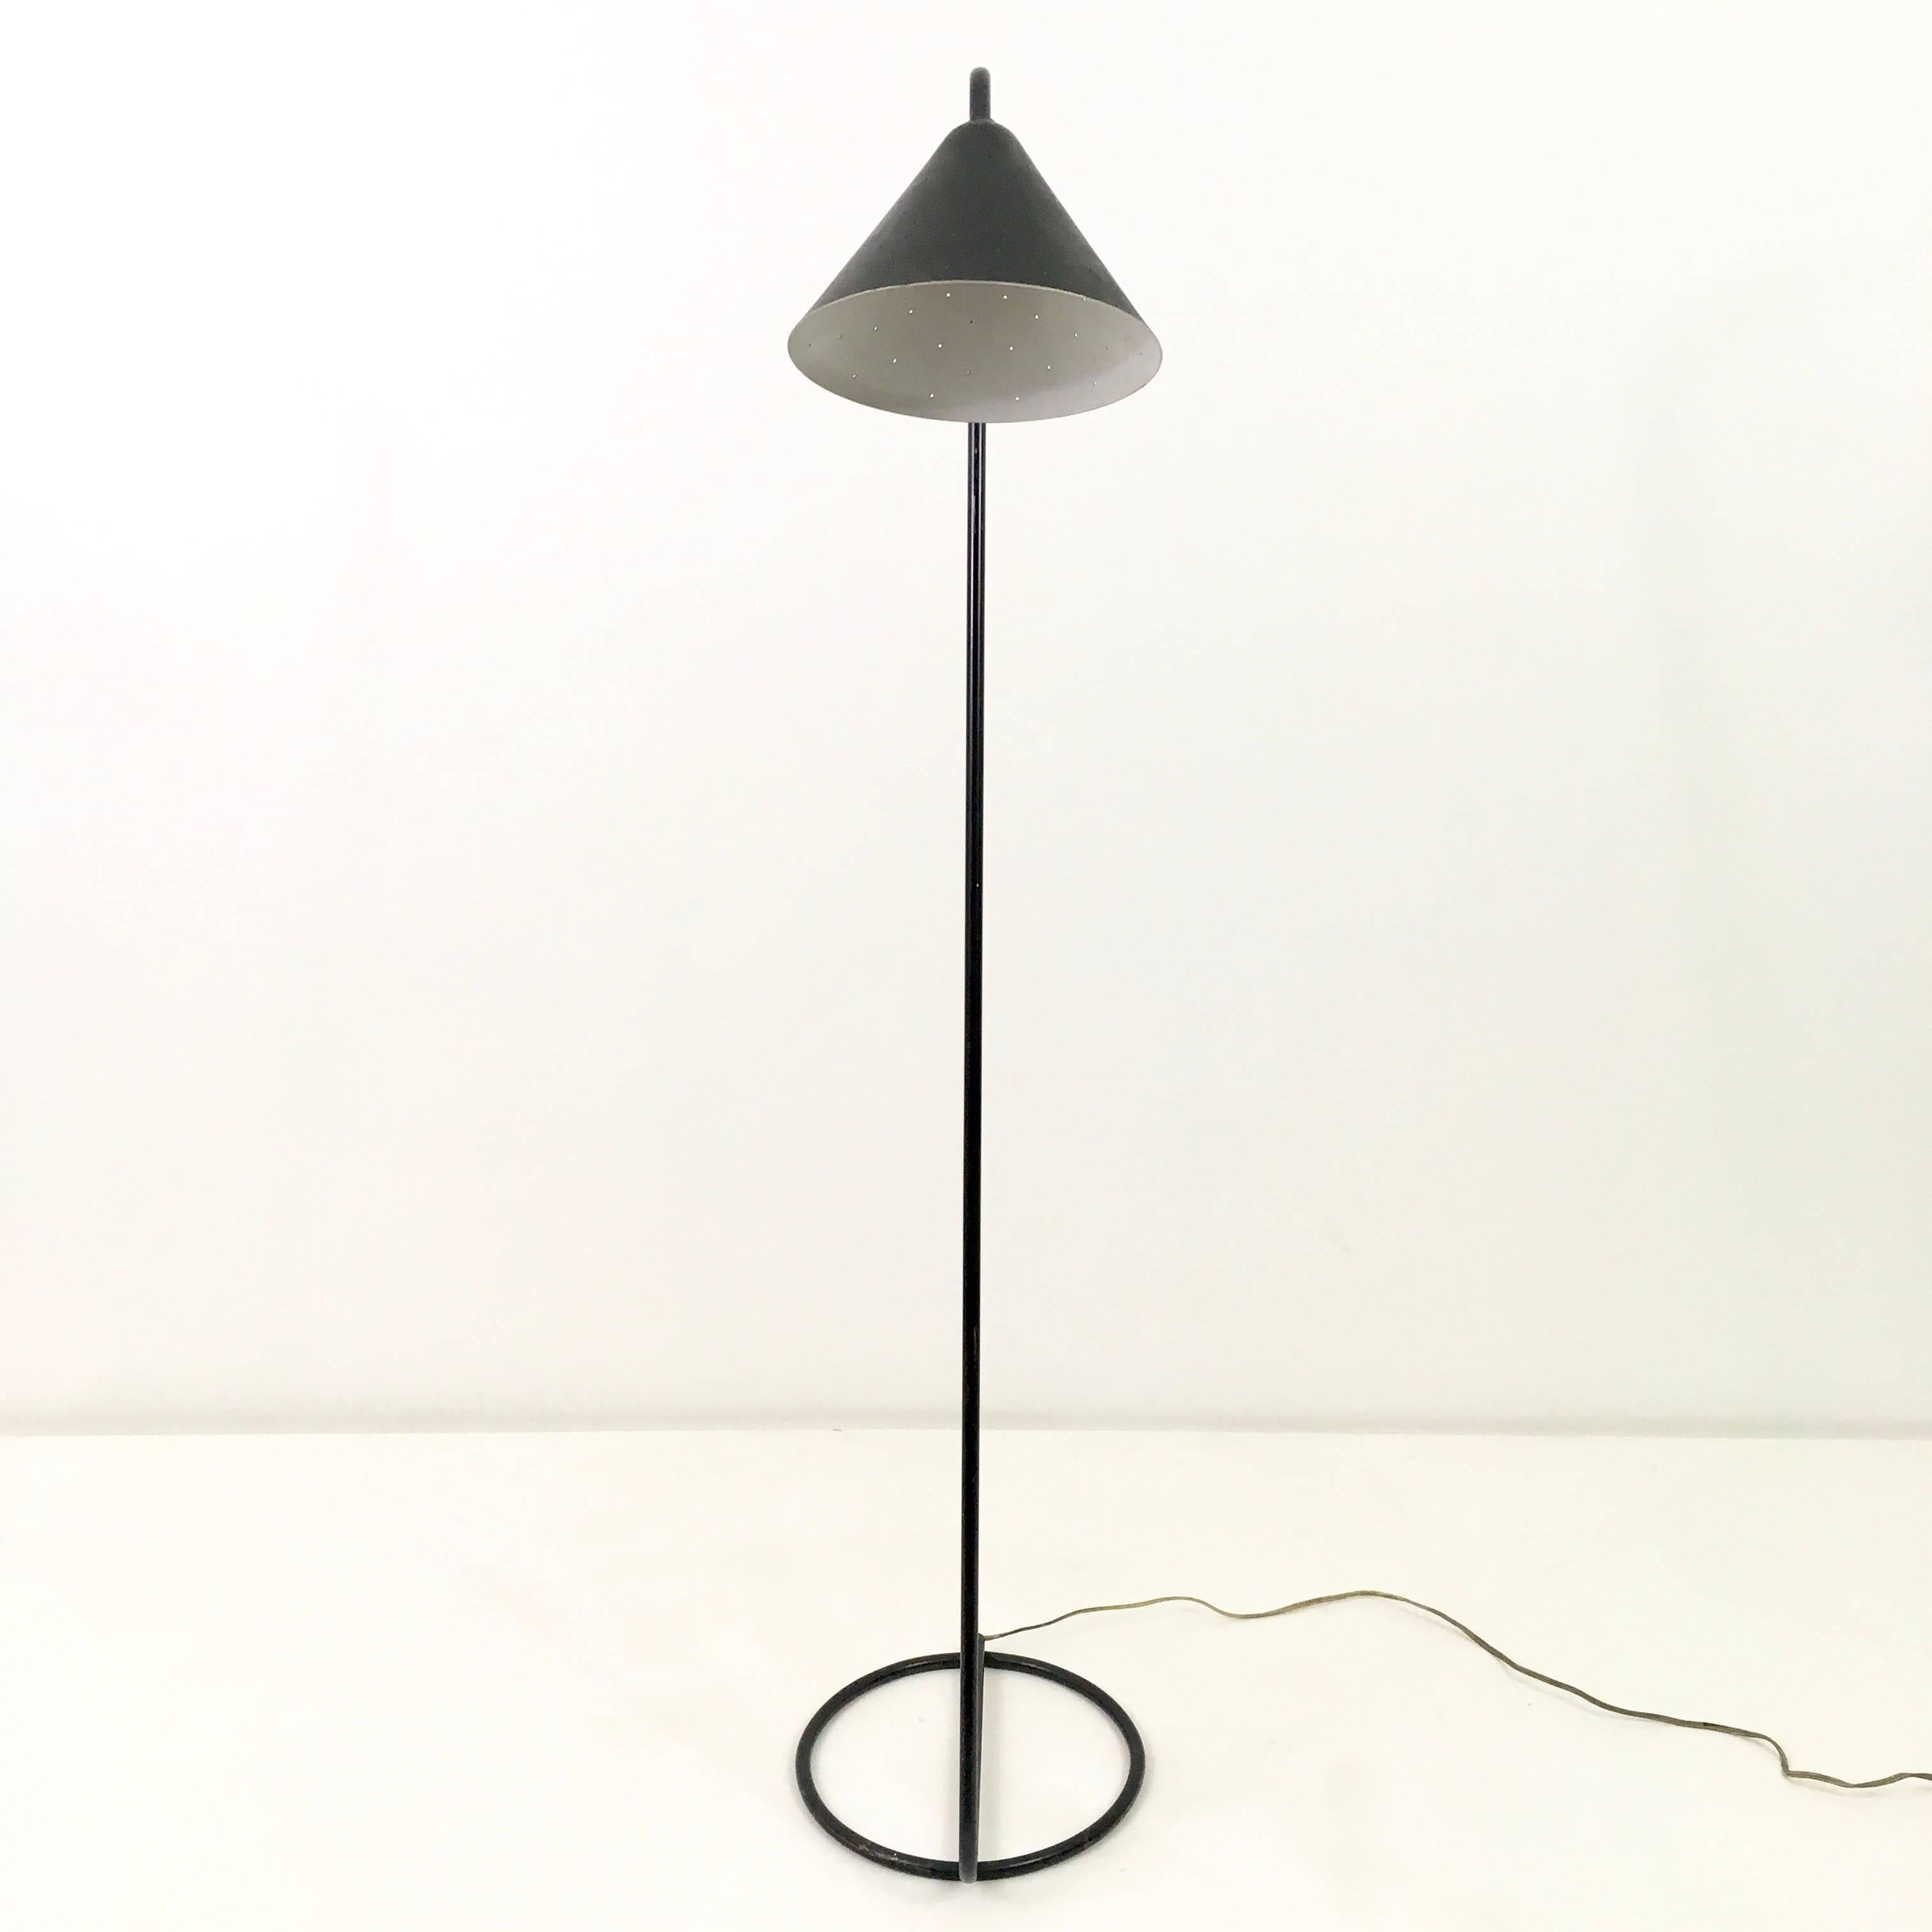 Jacques Biny floor lamp. Provenance: Barry Friedman NYC.